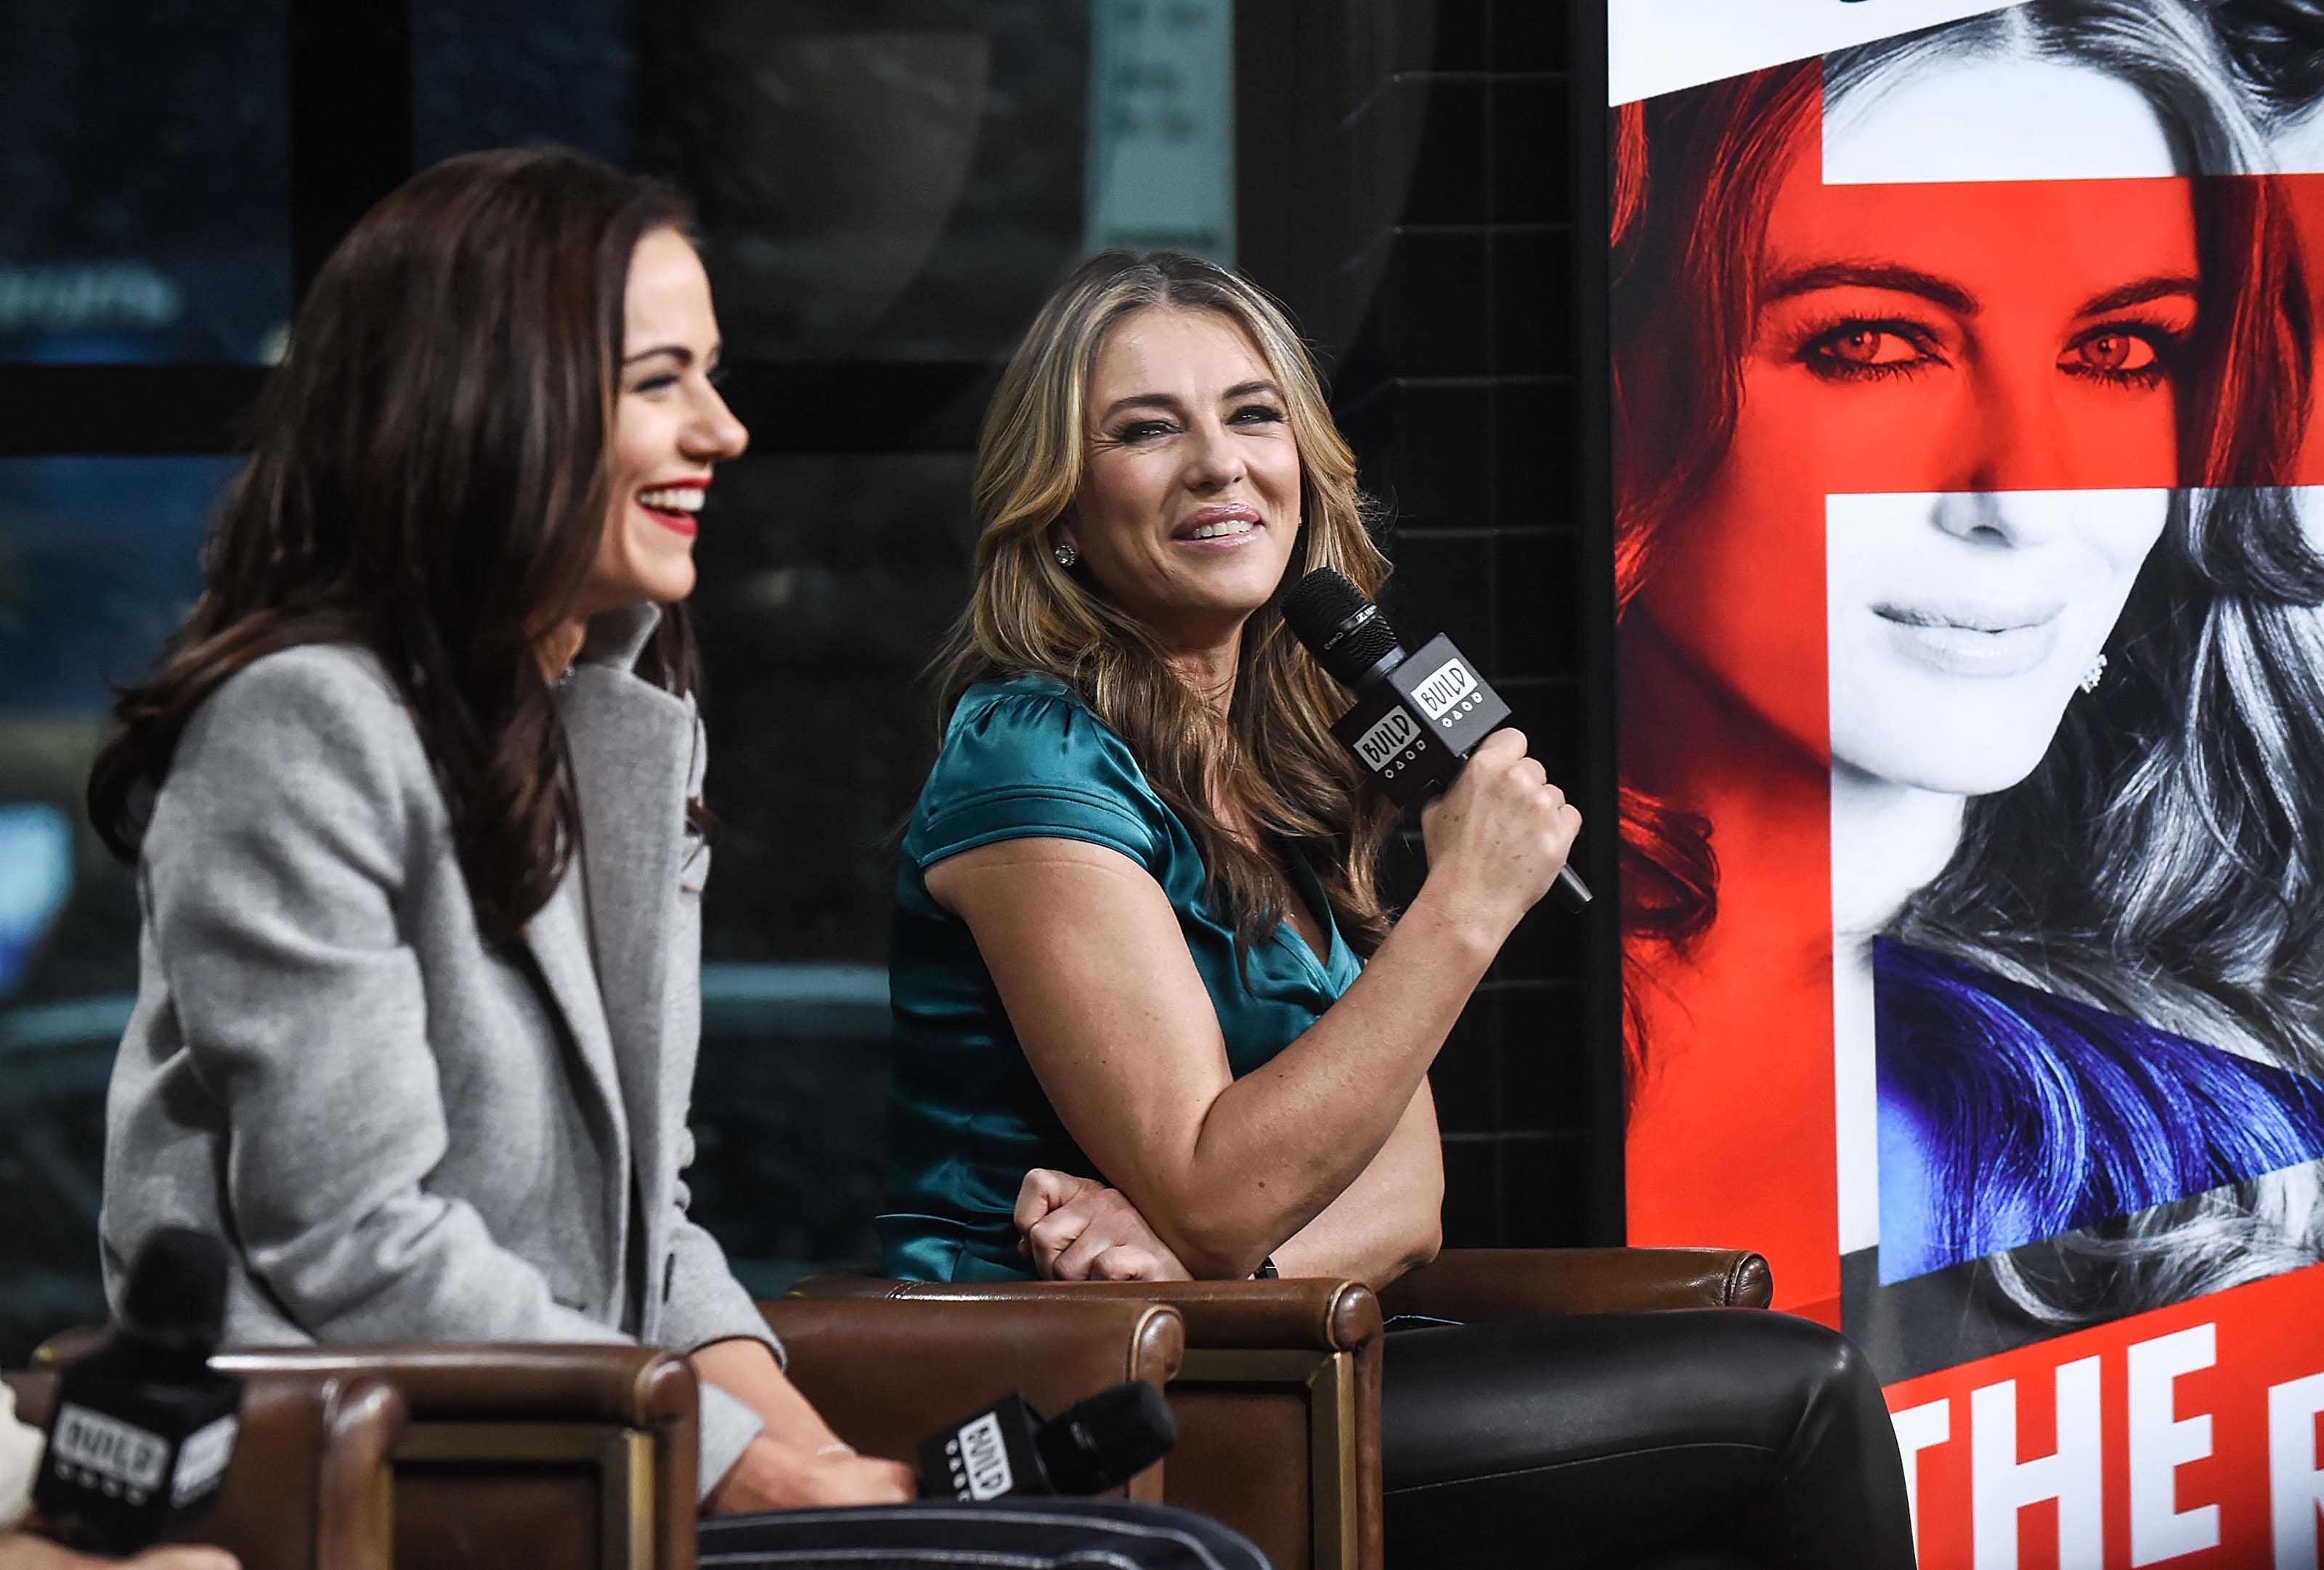 Elizabeth Hurley visits BUILD Series to discuss ‘The Royals’